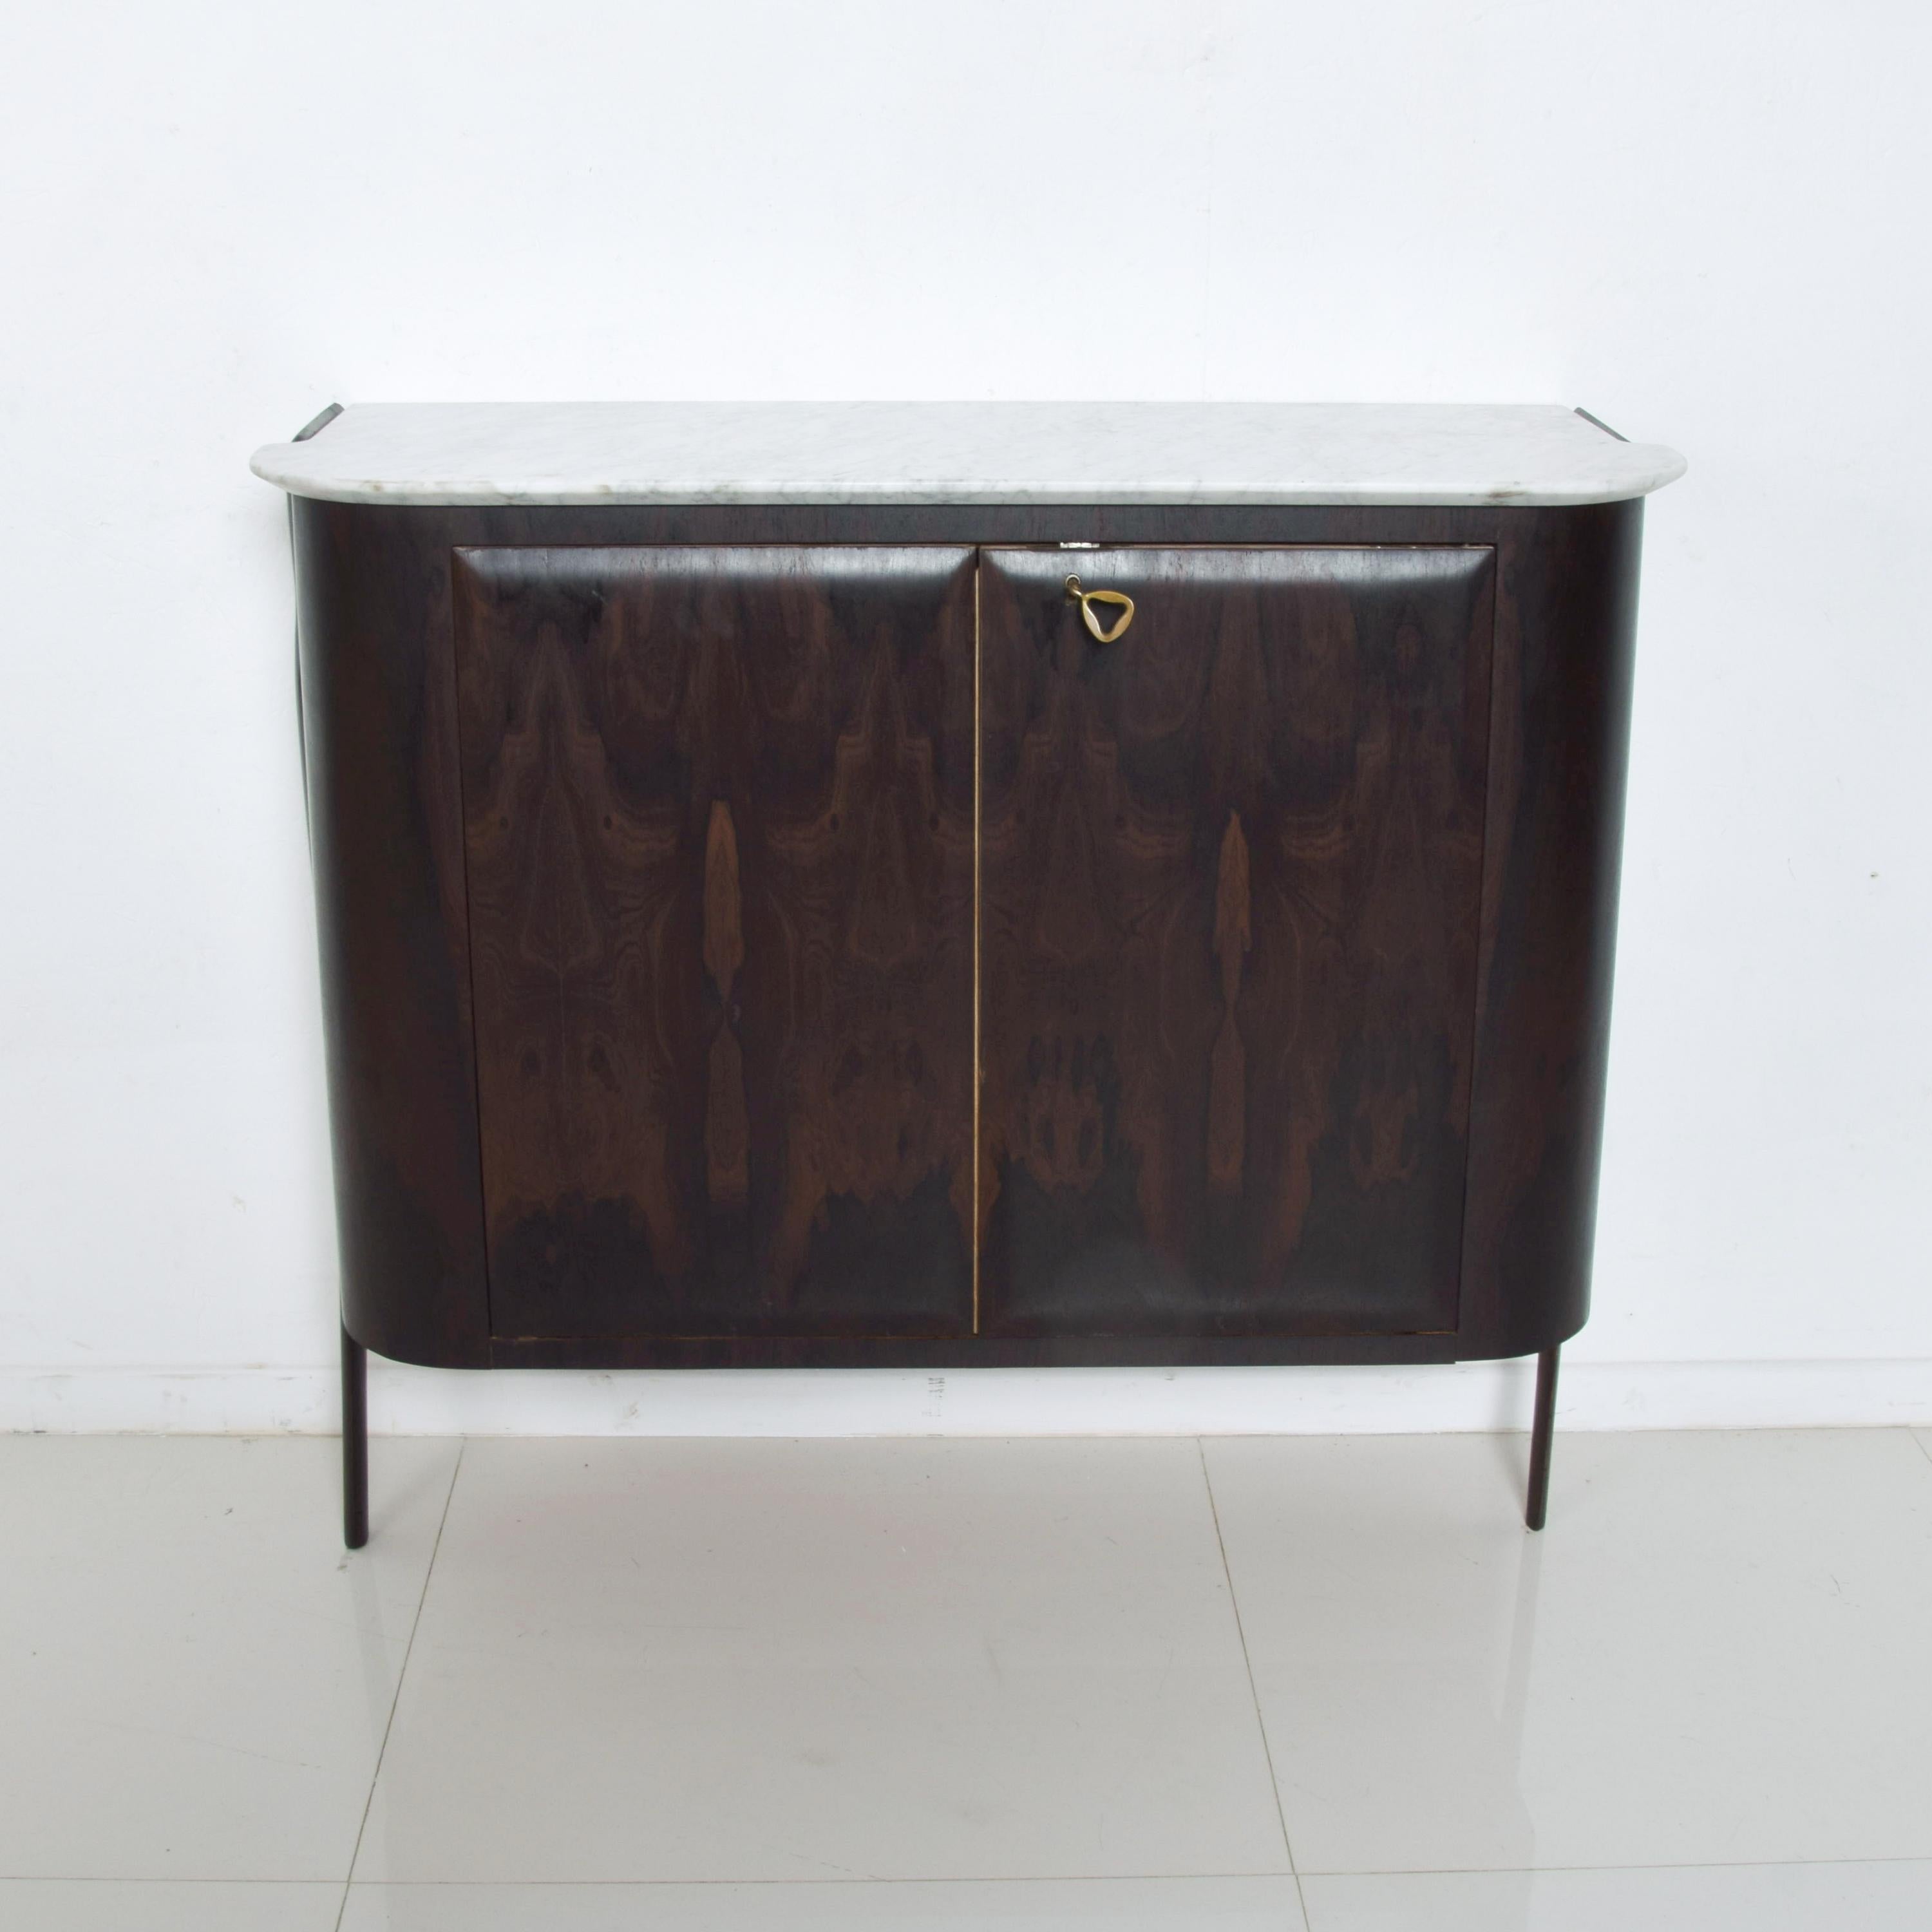 Ico Parisi elegant Italian marble entry console modern bar cabinet in rosewood Ziricote wood retains original key lock pull, circa 1950s, Italy
Has very clever key handle pull that serves as a lock. New marble top. Finish refreshed.
Double door